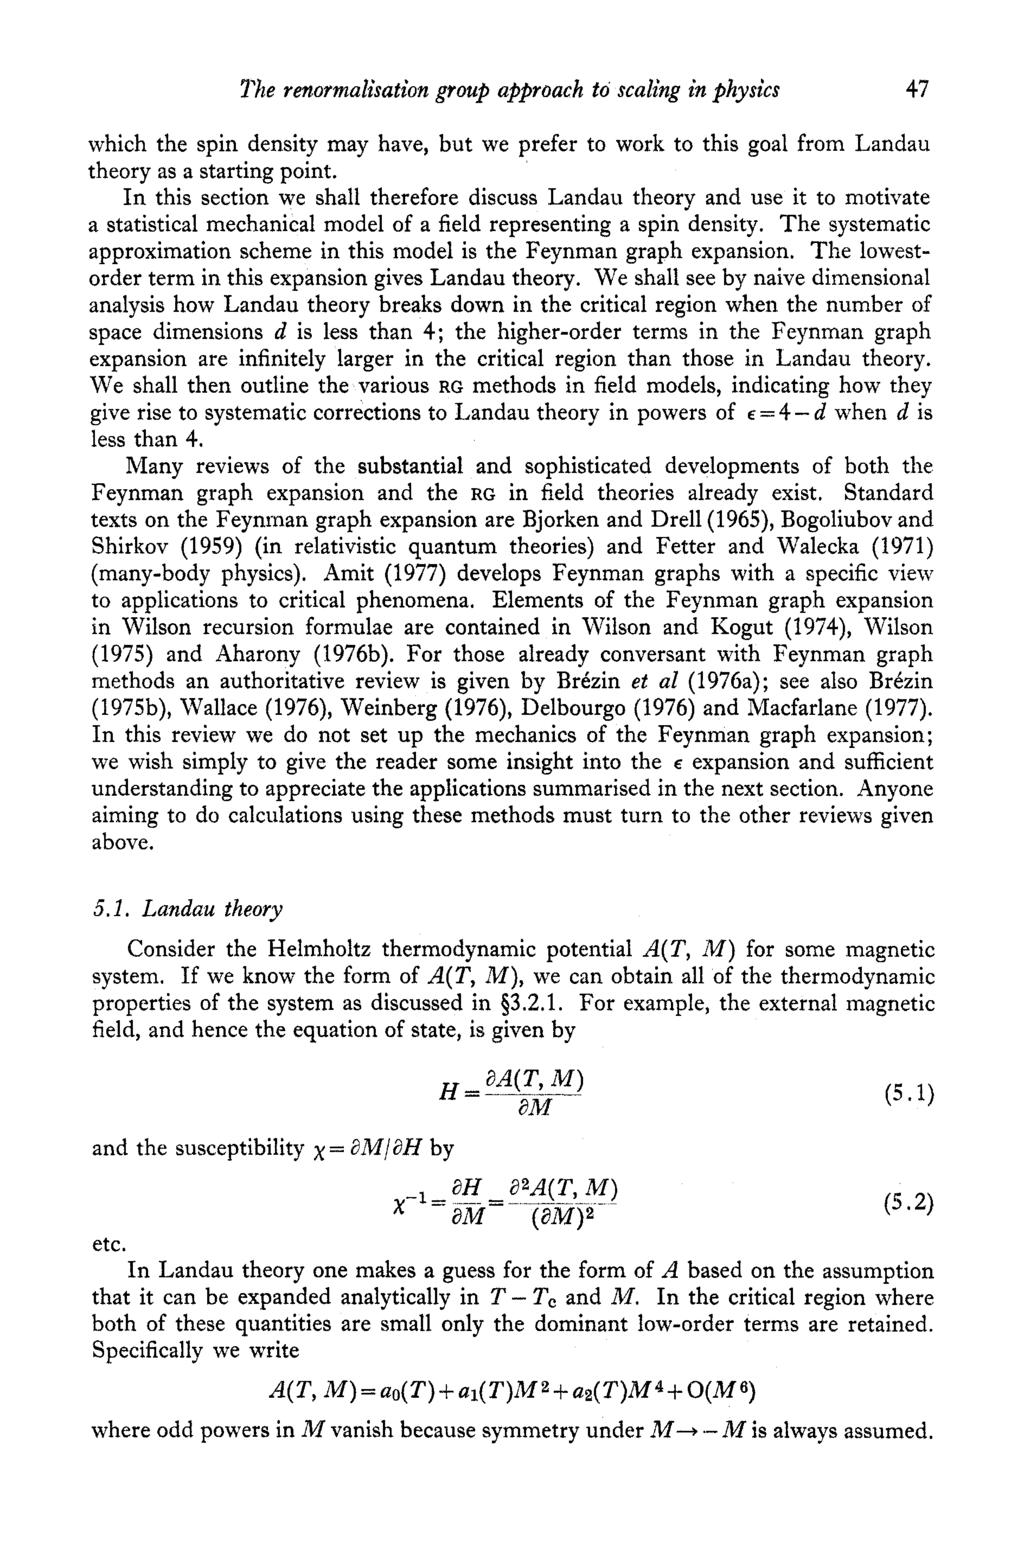 The renormalisation group approach to scaling in physics 47 which the spin density may have, but we prefer to work to this goal from Landau theory as a starting point.